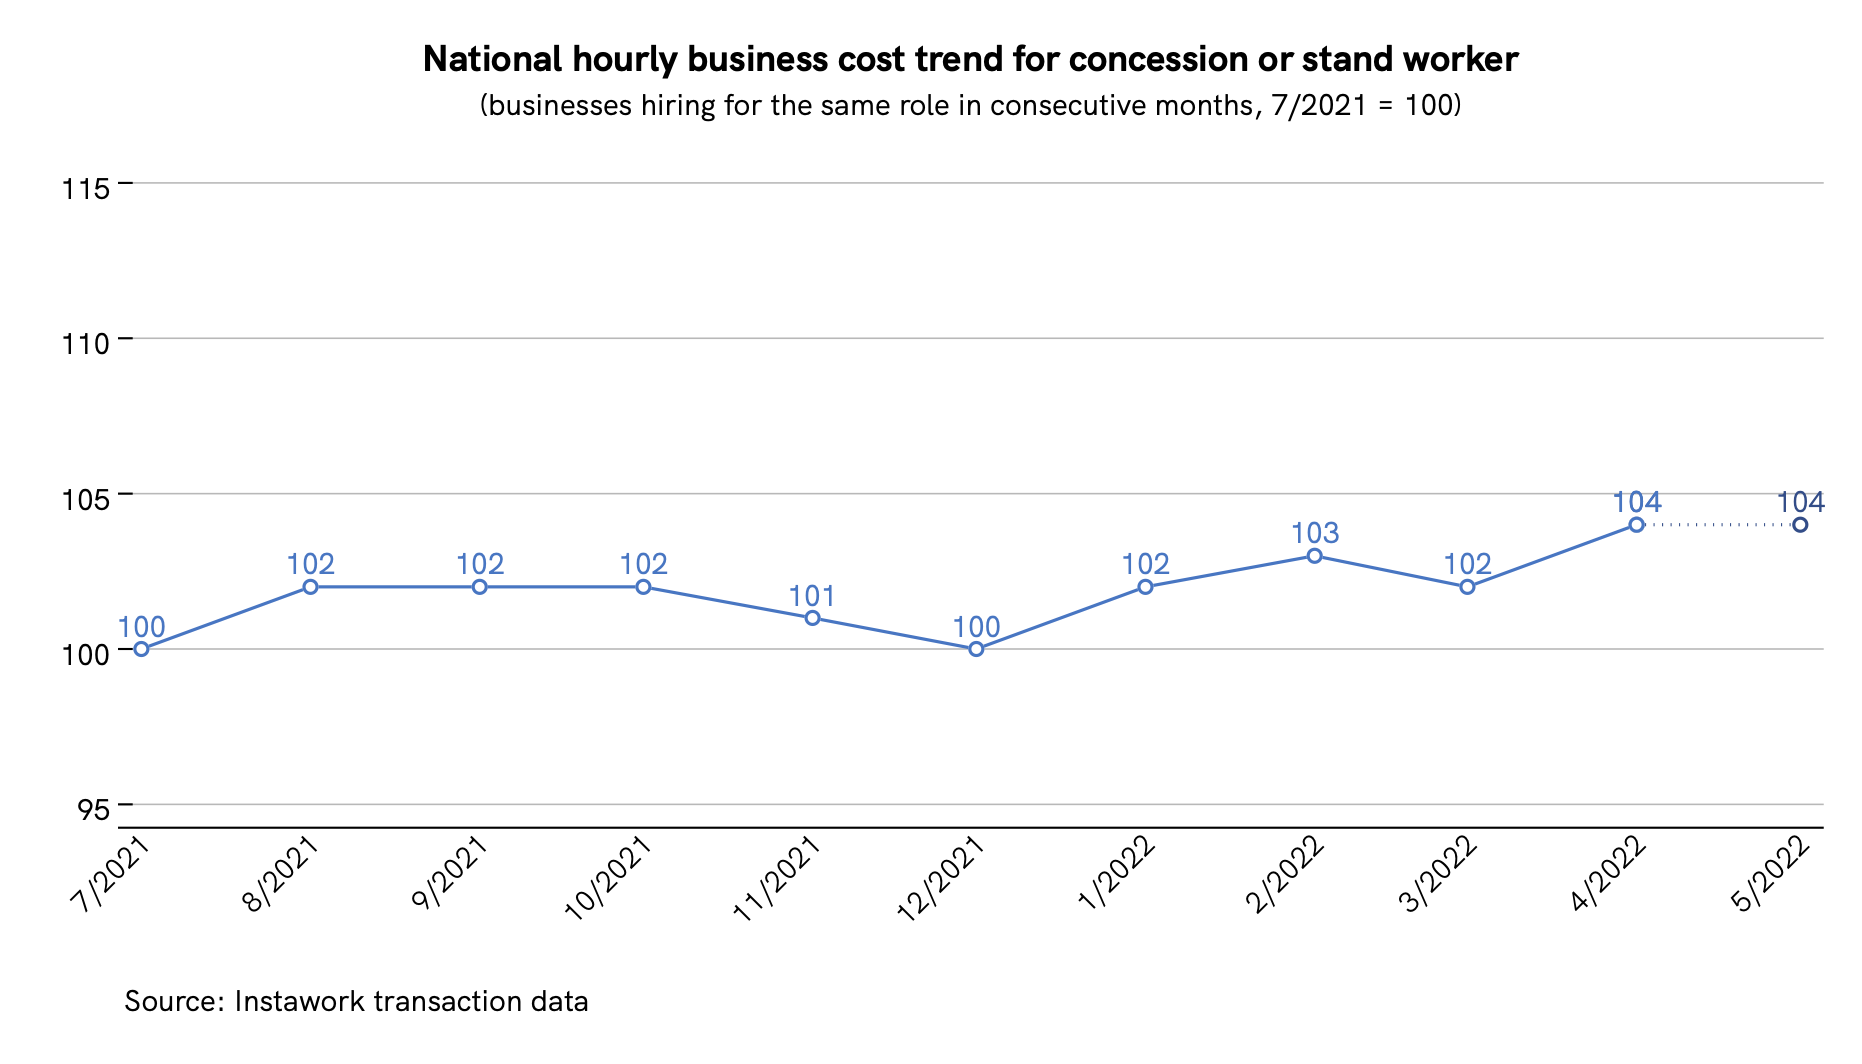 28 Apr 2022 business cost trend for concession or stand worker